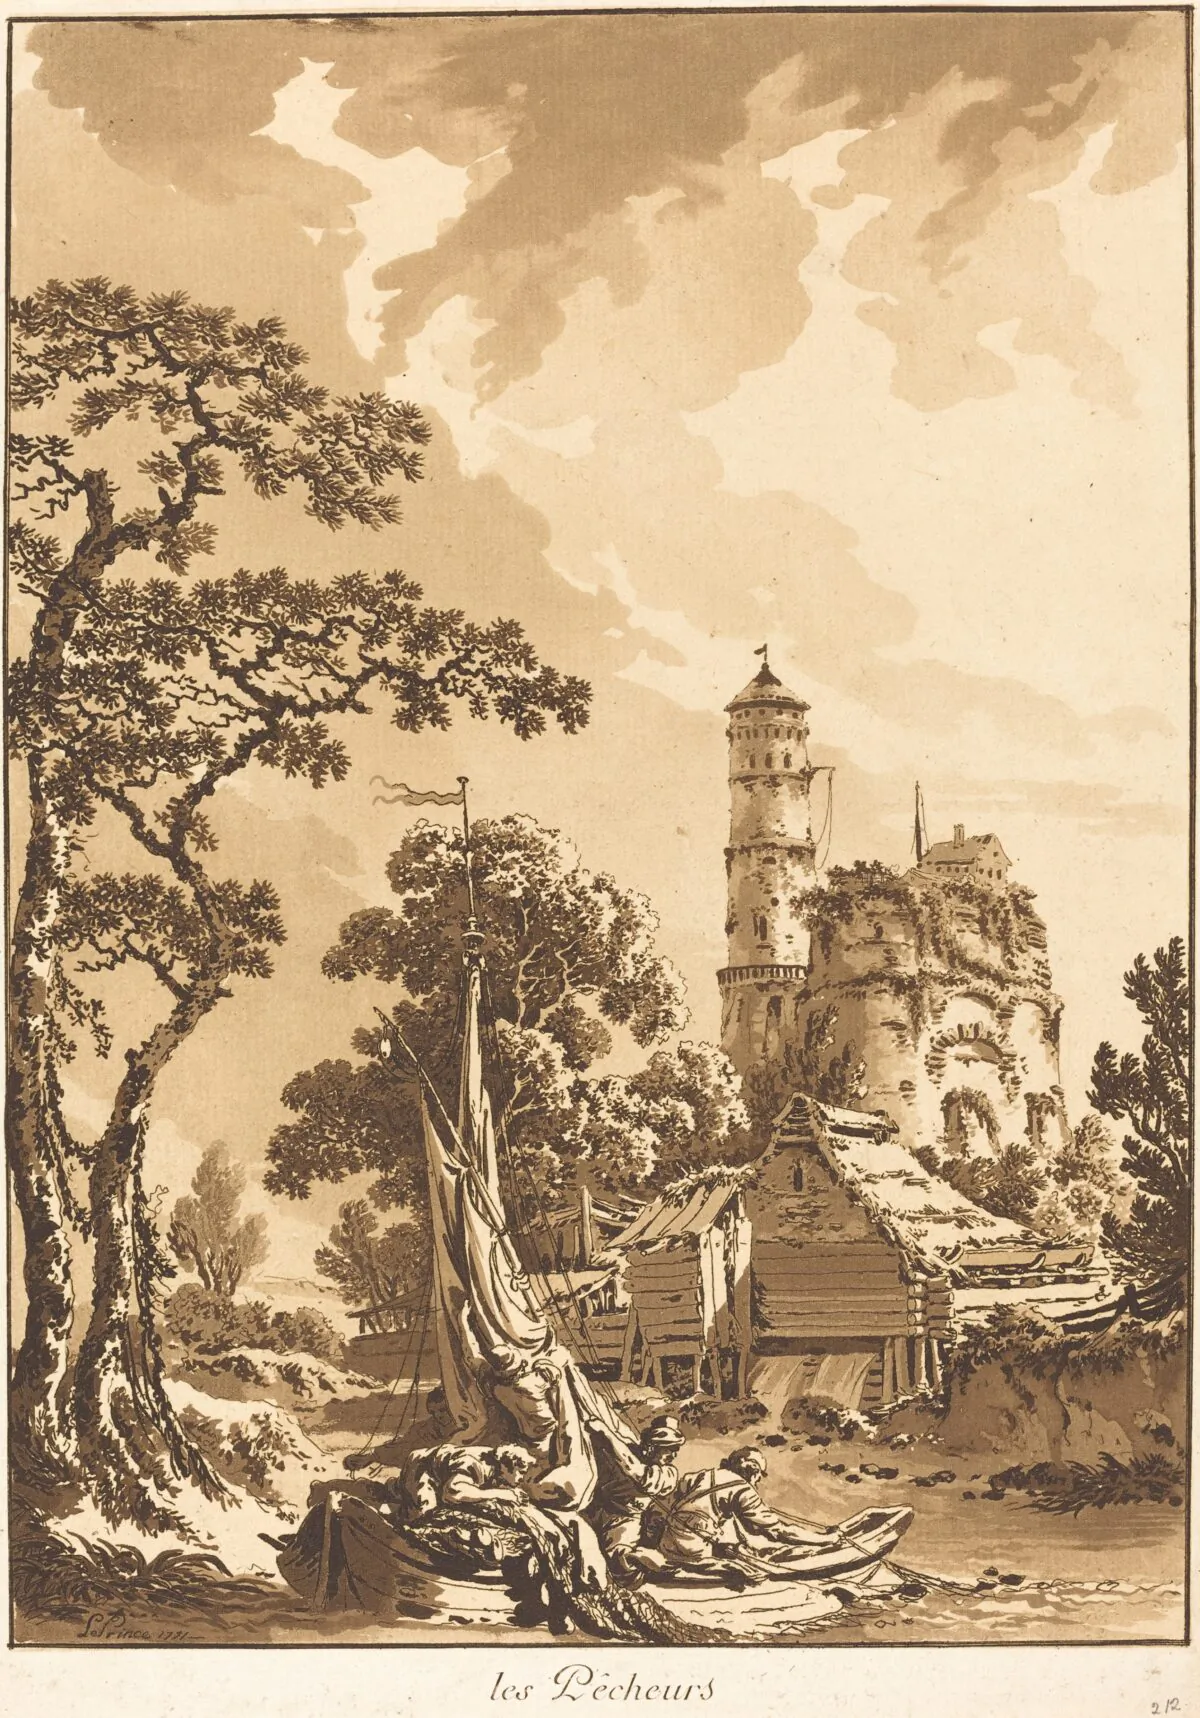 "The Fishermen," 1771, by Jean-Baptiste Le Prince. Etching and aquatint printed in brown image; 12 11/16 inches by 9 1/8 inches. Ailsa Mellon Bruce Fund, National Gallery of Art, Washington. (National Gallery of Art, Washington)